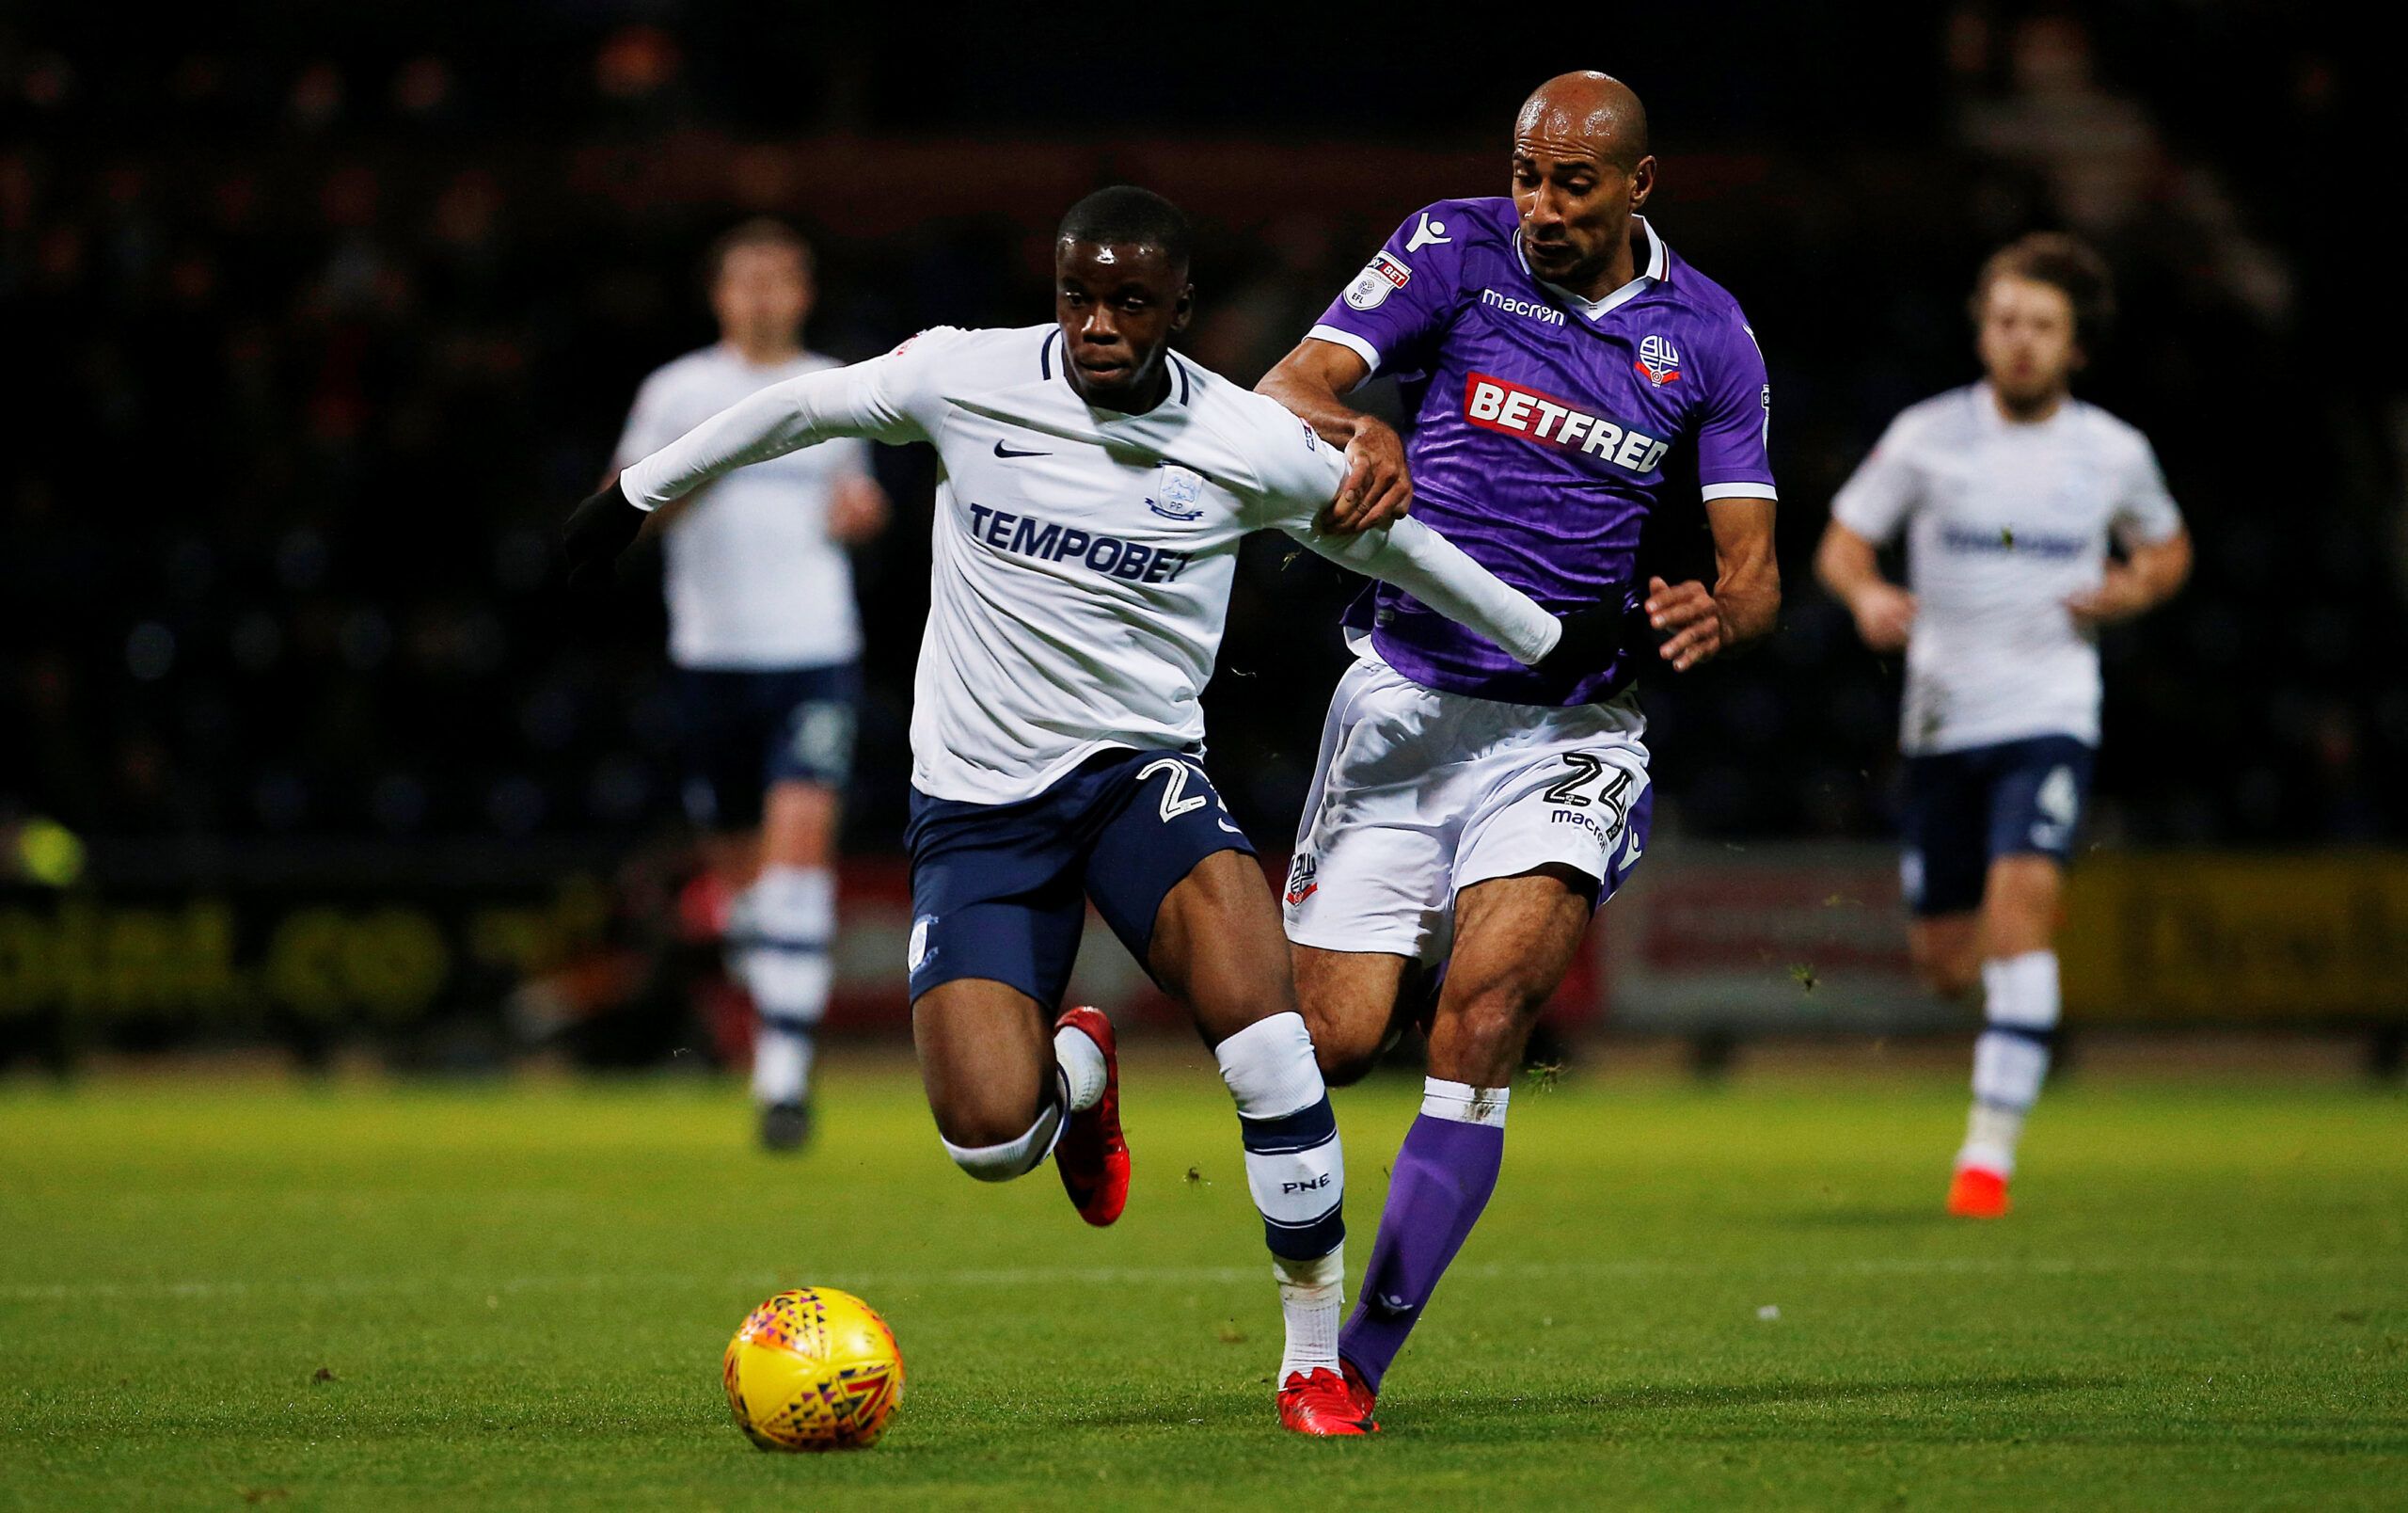 Soccer Football - Championship - Preston North End vs Bolton Wanderers - Deepdale, Preston, Britain - November 17, 2017   Preston North End's Stephy Mavididi (L) in action with Bolton Wanderers' Darren Pratley   Action Images/Craig Brough    EDITORIAL USE ONLY. No use with unauthorized audio, video, data, fixture lists, club/league logos or 